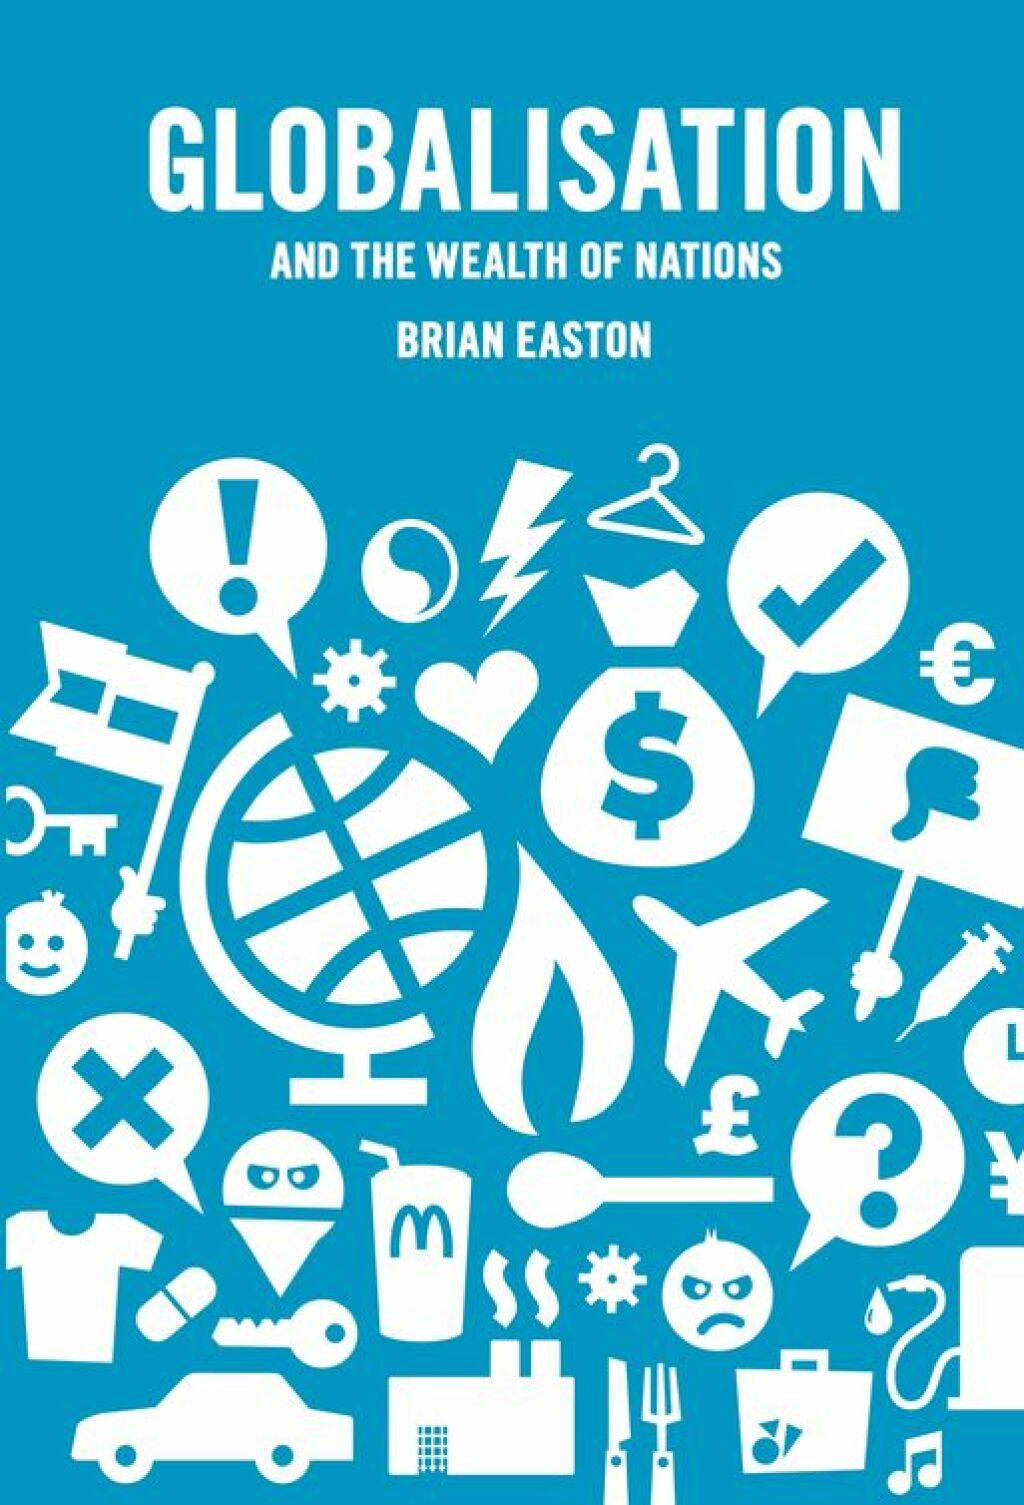 Globalisation and the Wealth of Nations (eBook Rental) - Brian Easton,